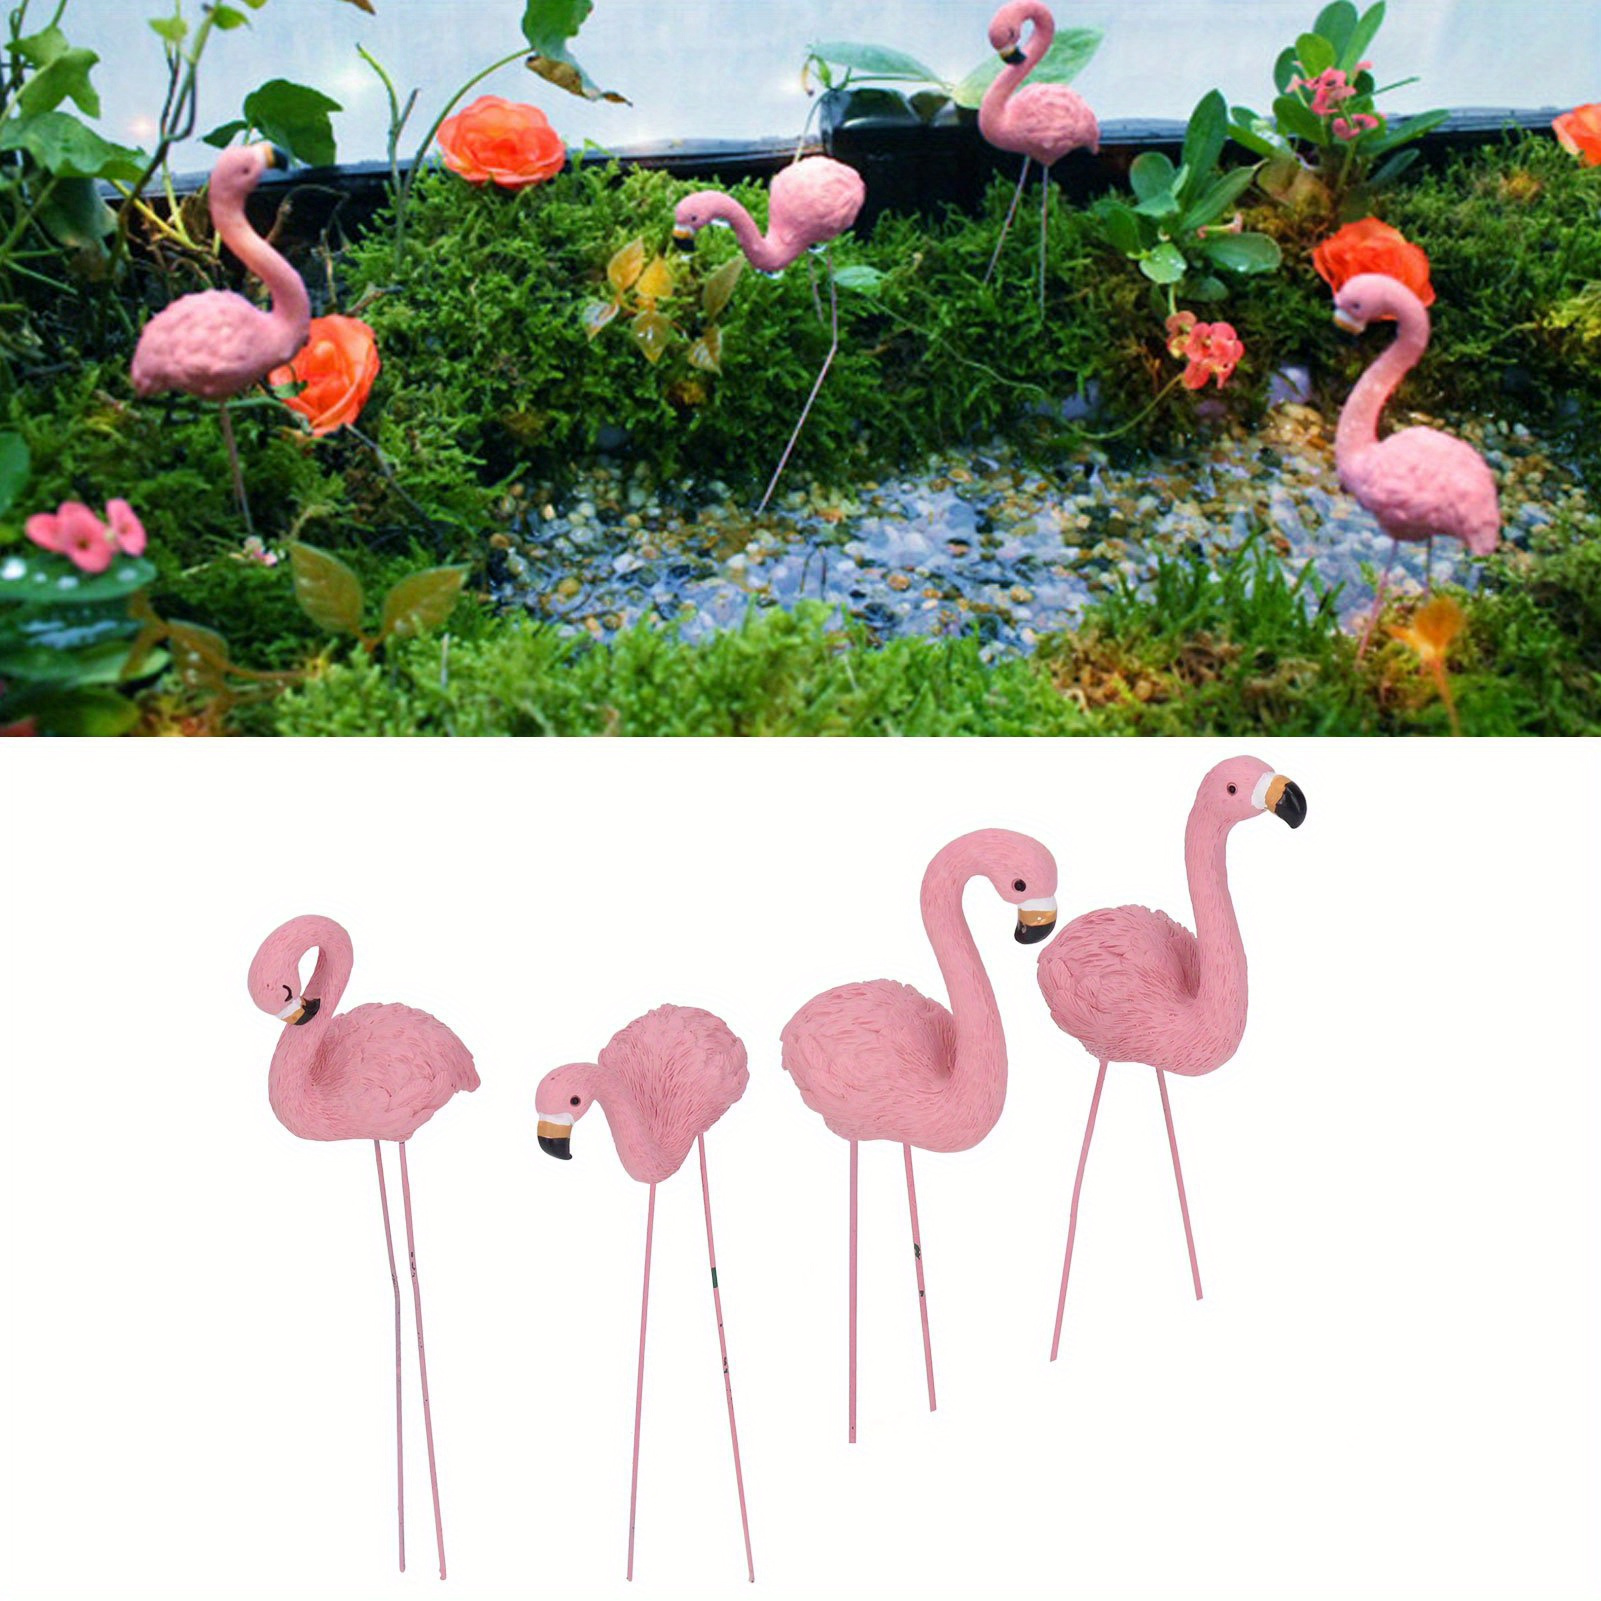 

4 Pcs Garden Statue Fine Details Stylish Vivid Small Flamingo Statue For Yard Lawn Patio Decorations Gifts